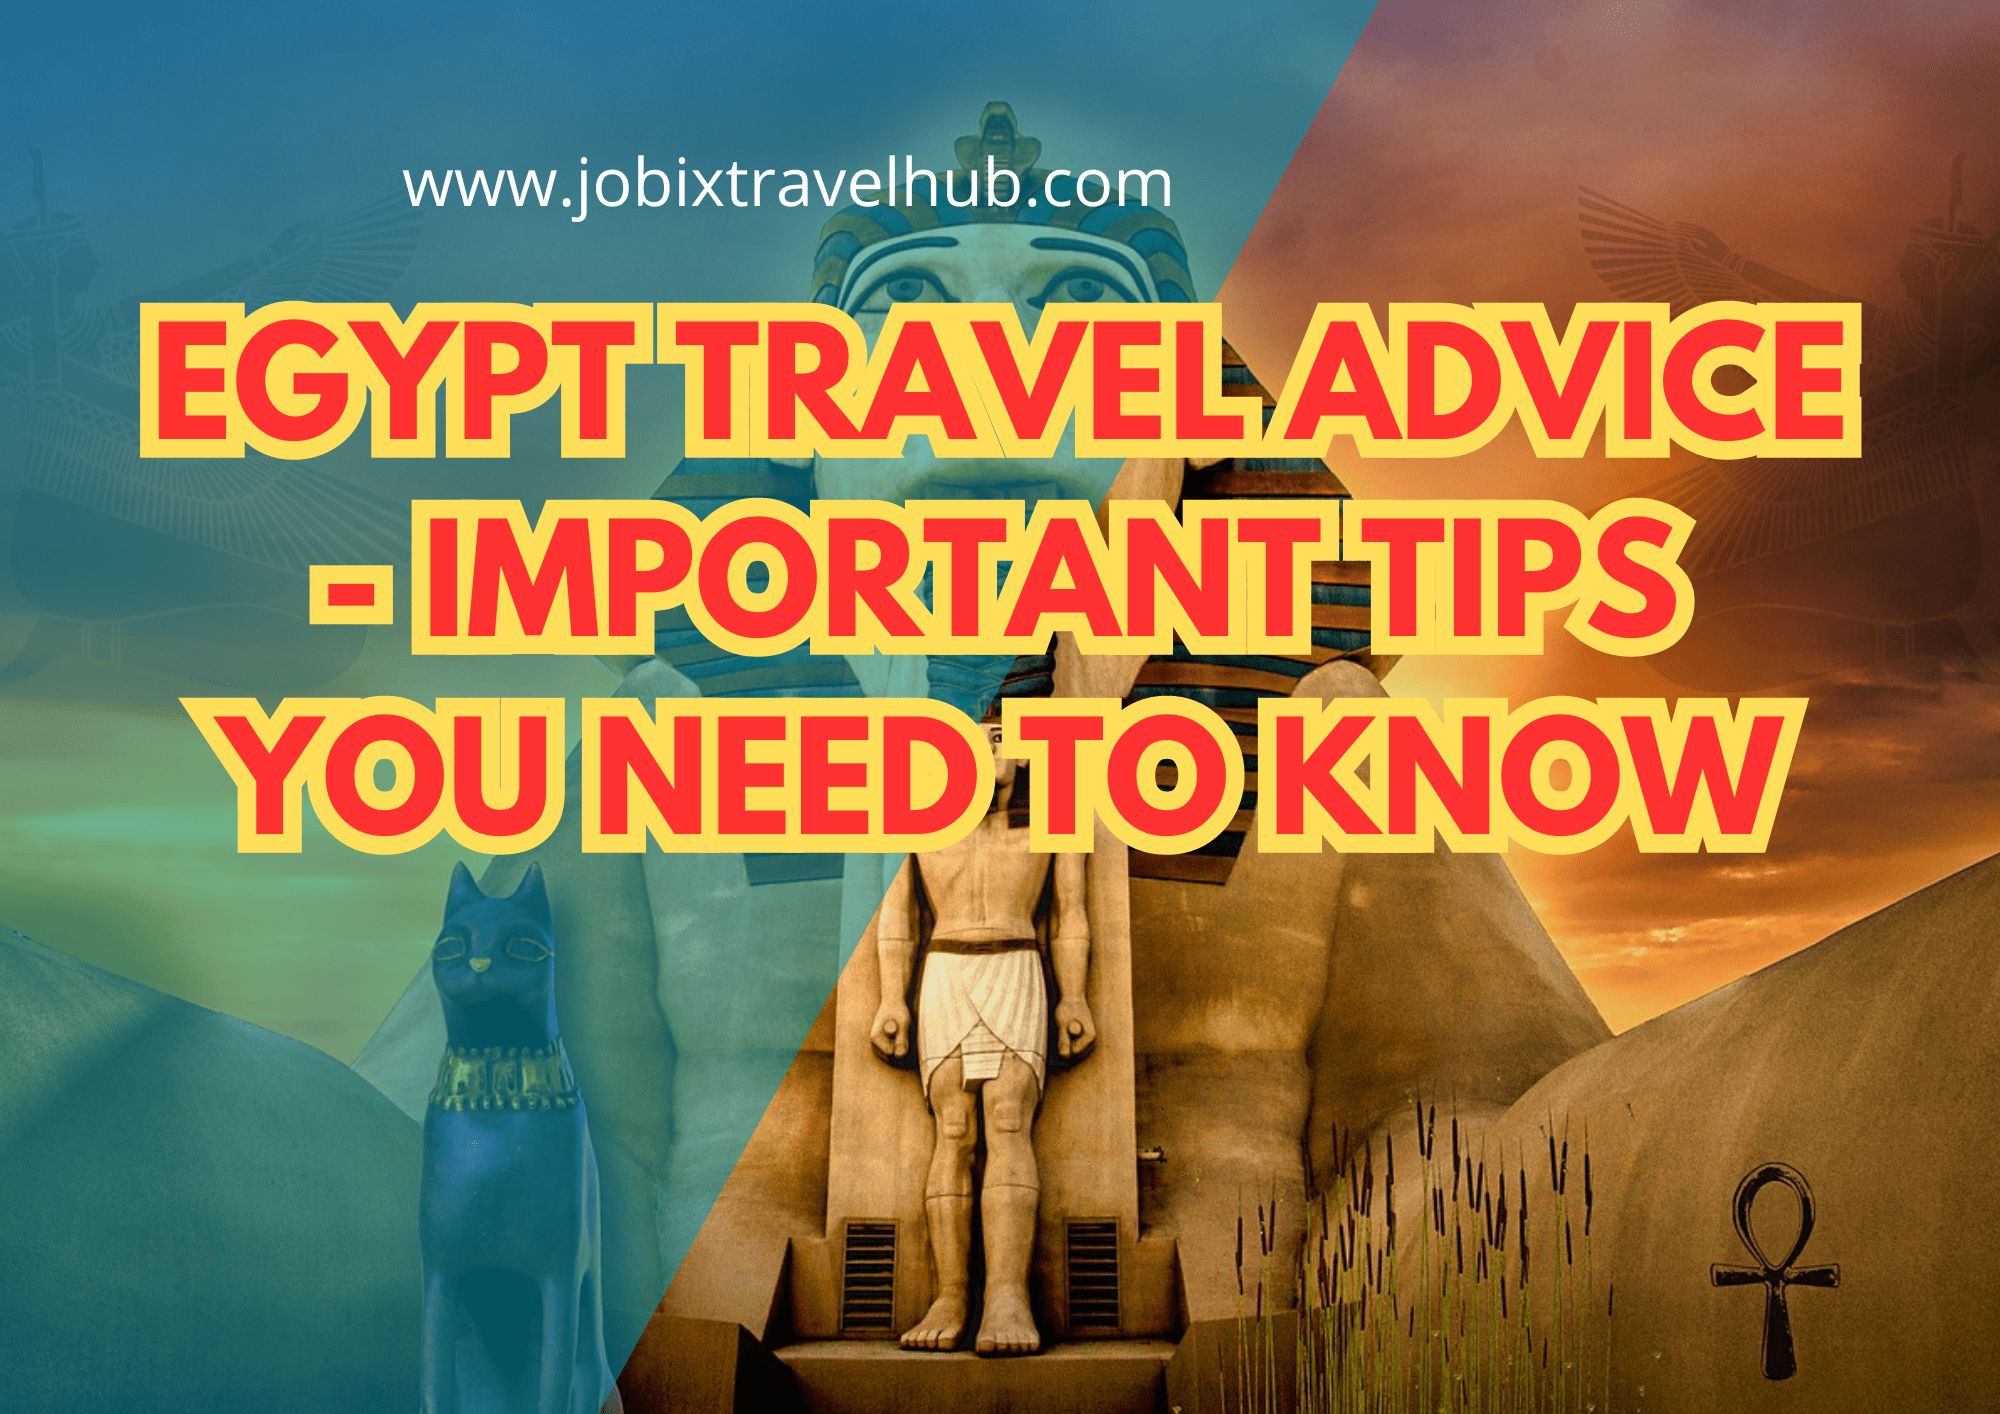 Egypt Travel Advice - Important Tips You Need To Know